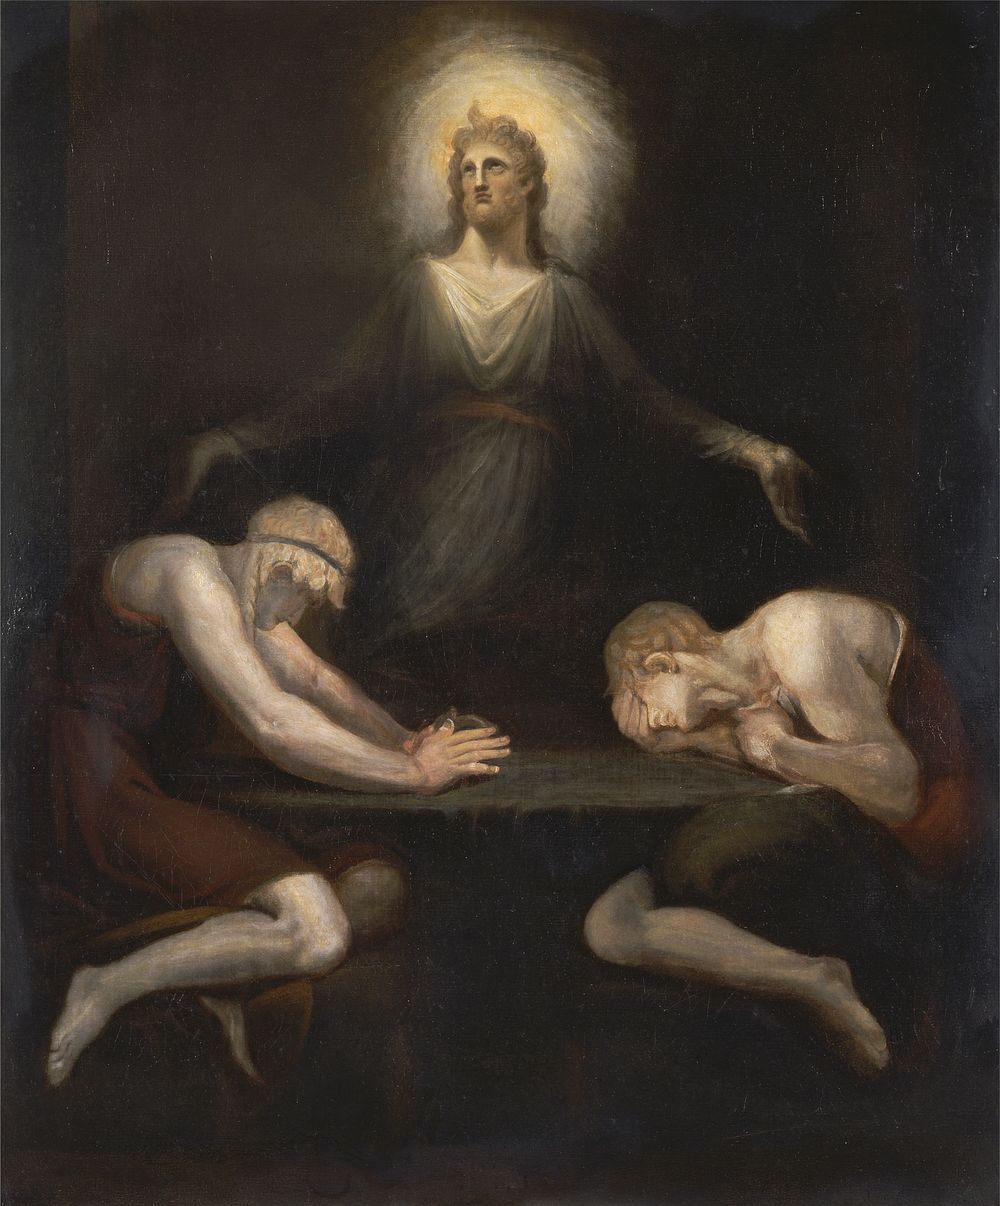 Christ Disappearing at Emmaus [1792, Royal Academy of Arts, London, exhibition catalogue]